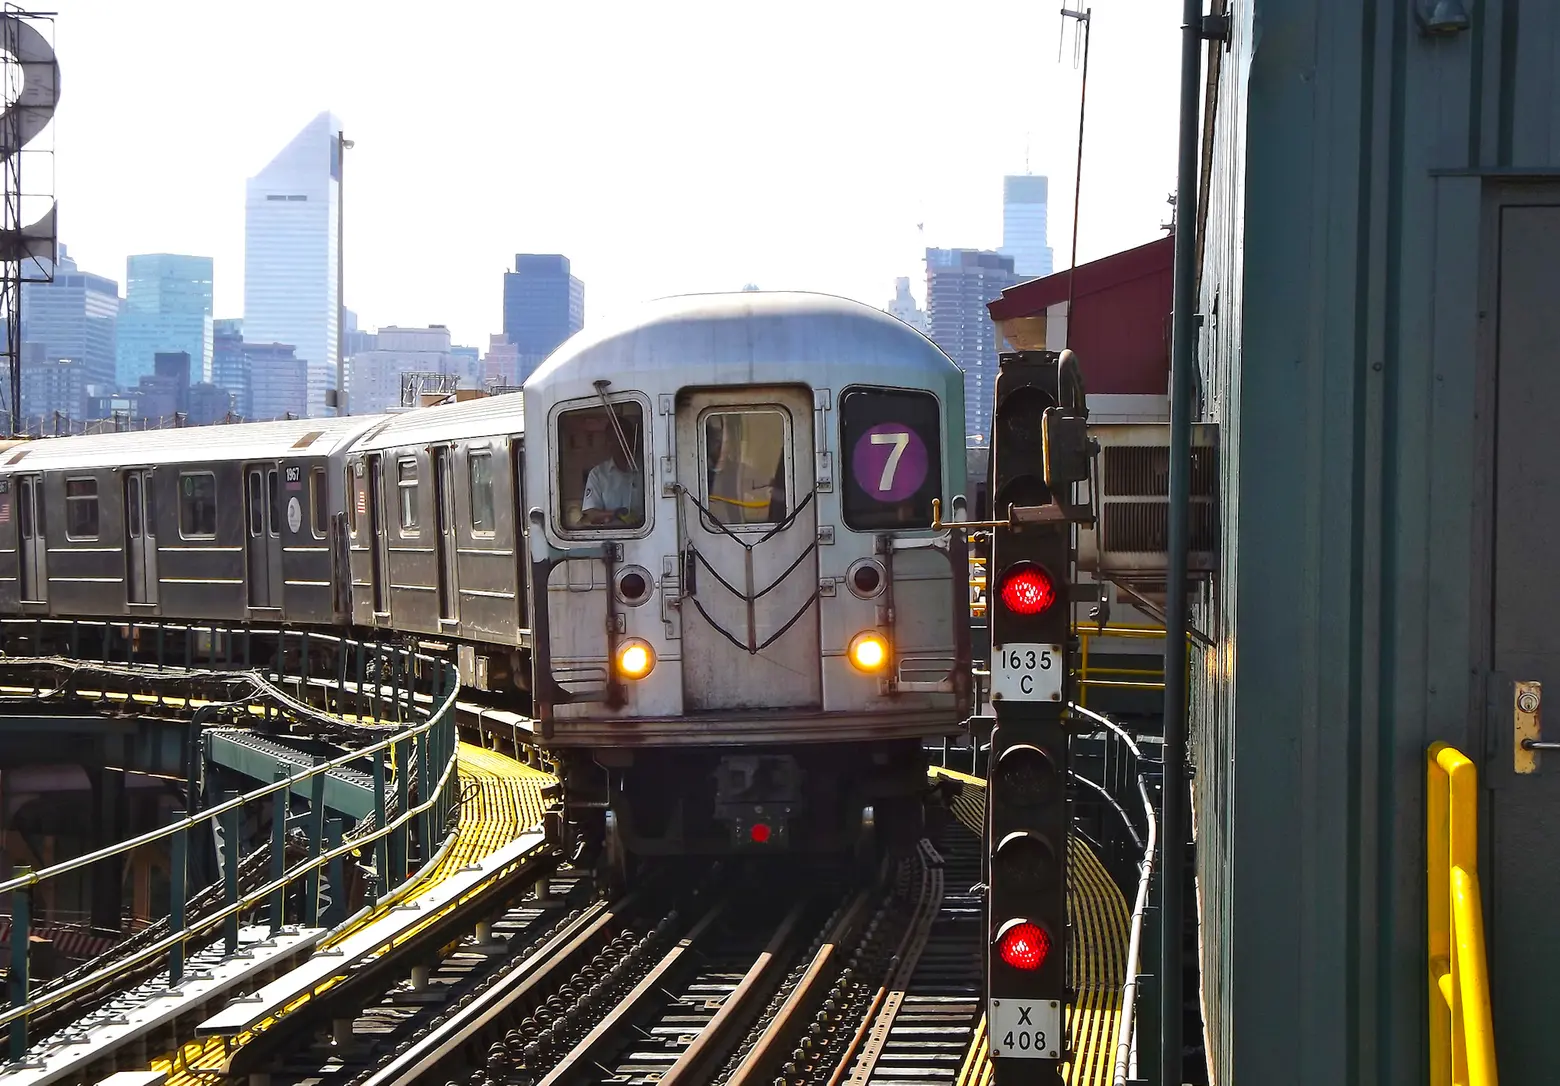 Bad news for L, Q, and 7 train riders trying to get to Manhattan this weekend